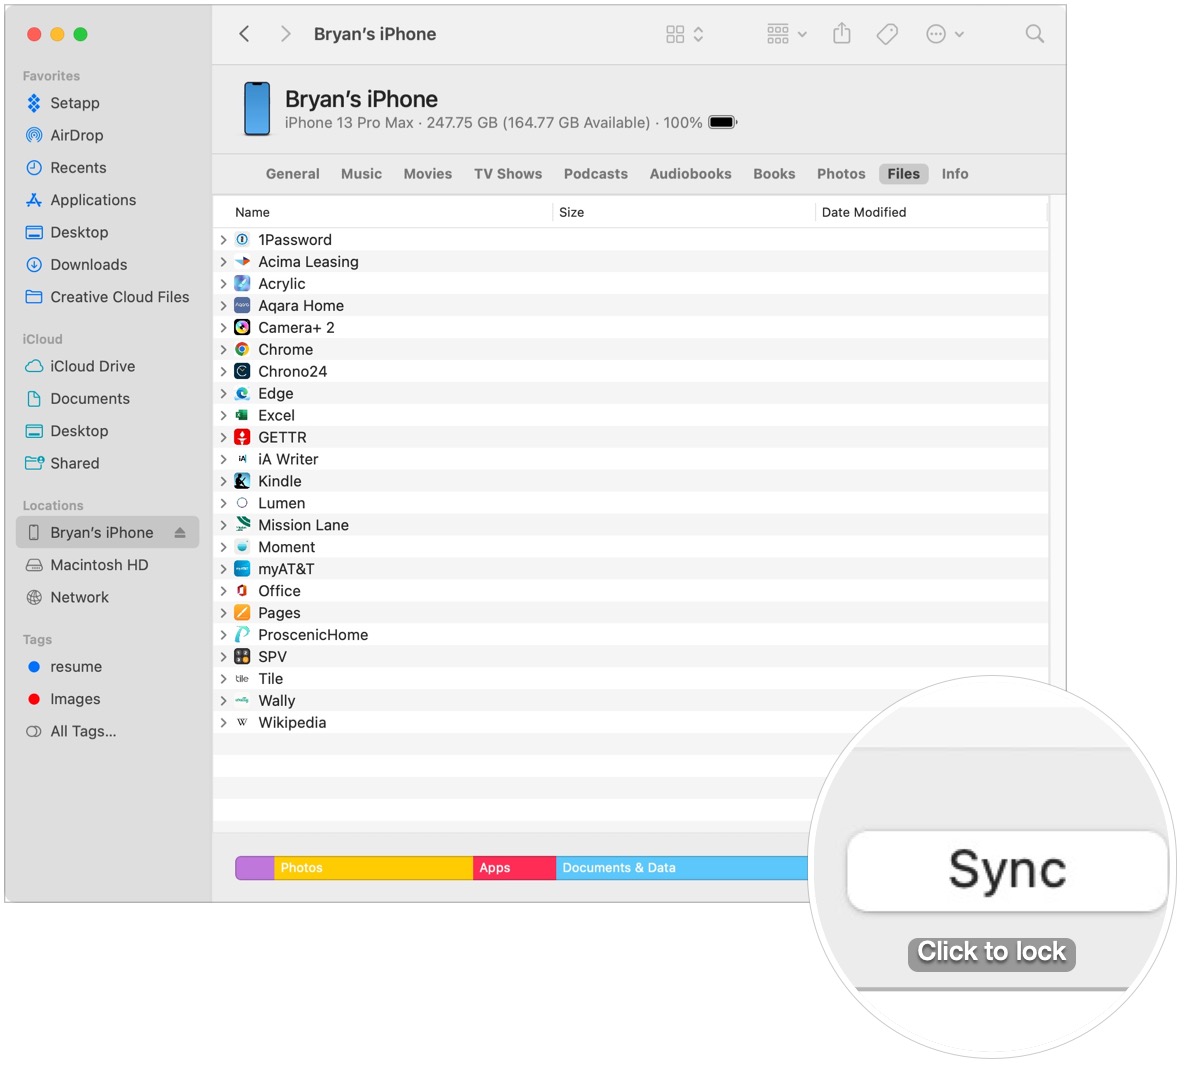 To sync files to your iPhone or iPad, click the files you wish to sync, then select Apple, then Sync.